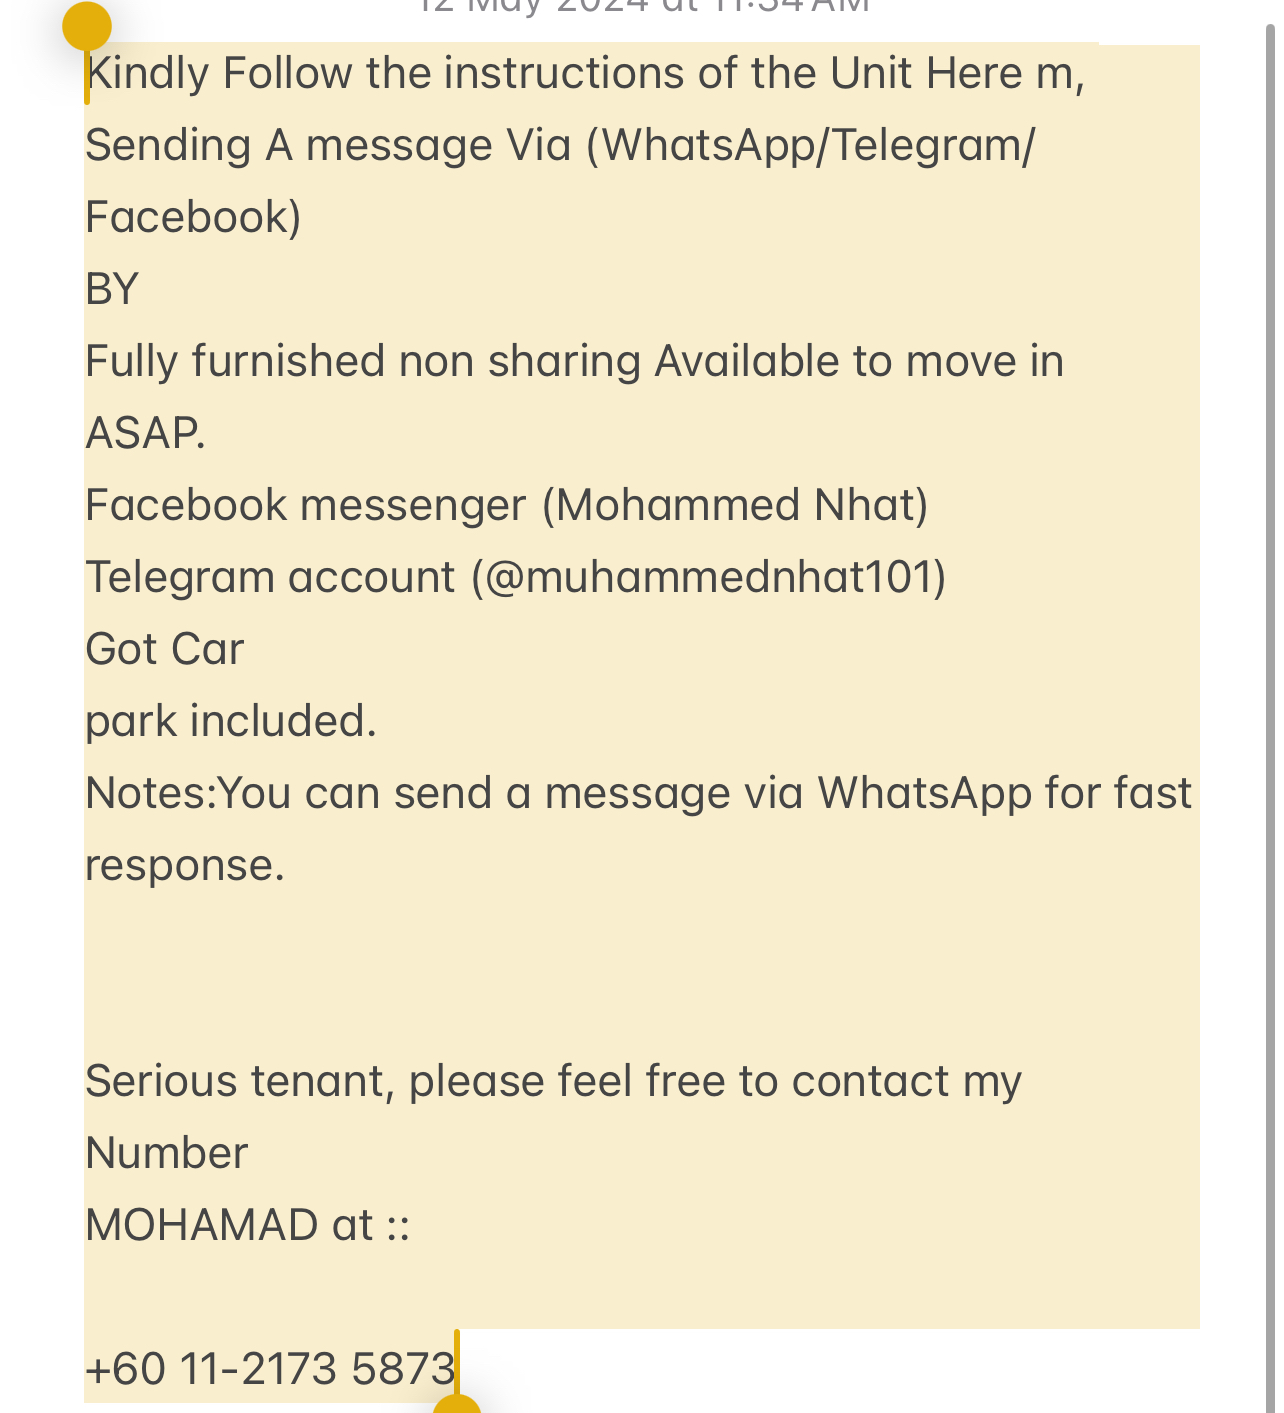 room for rent, master room, padang rengas, Send the owner a message on WhatsApp/facebook if you want to RENT the unit facebook (Mohammed Nhat)&Telegram(@muhammednhat101) Fully furnished non sharing :(comfortable)